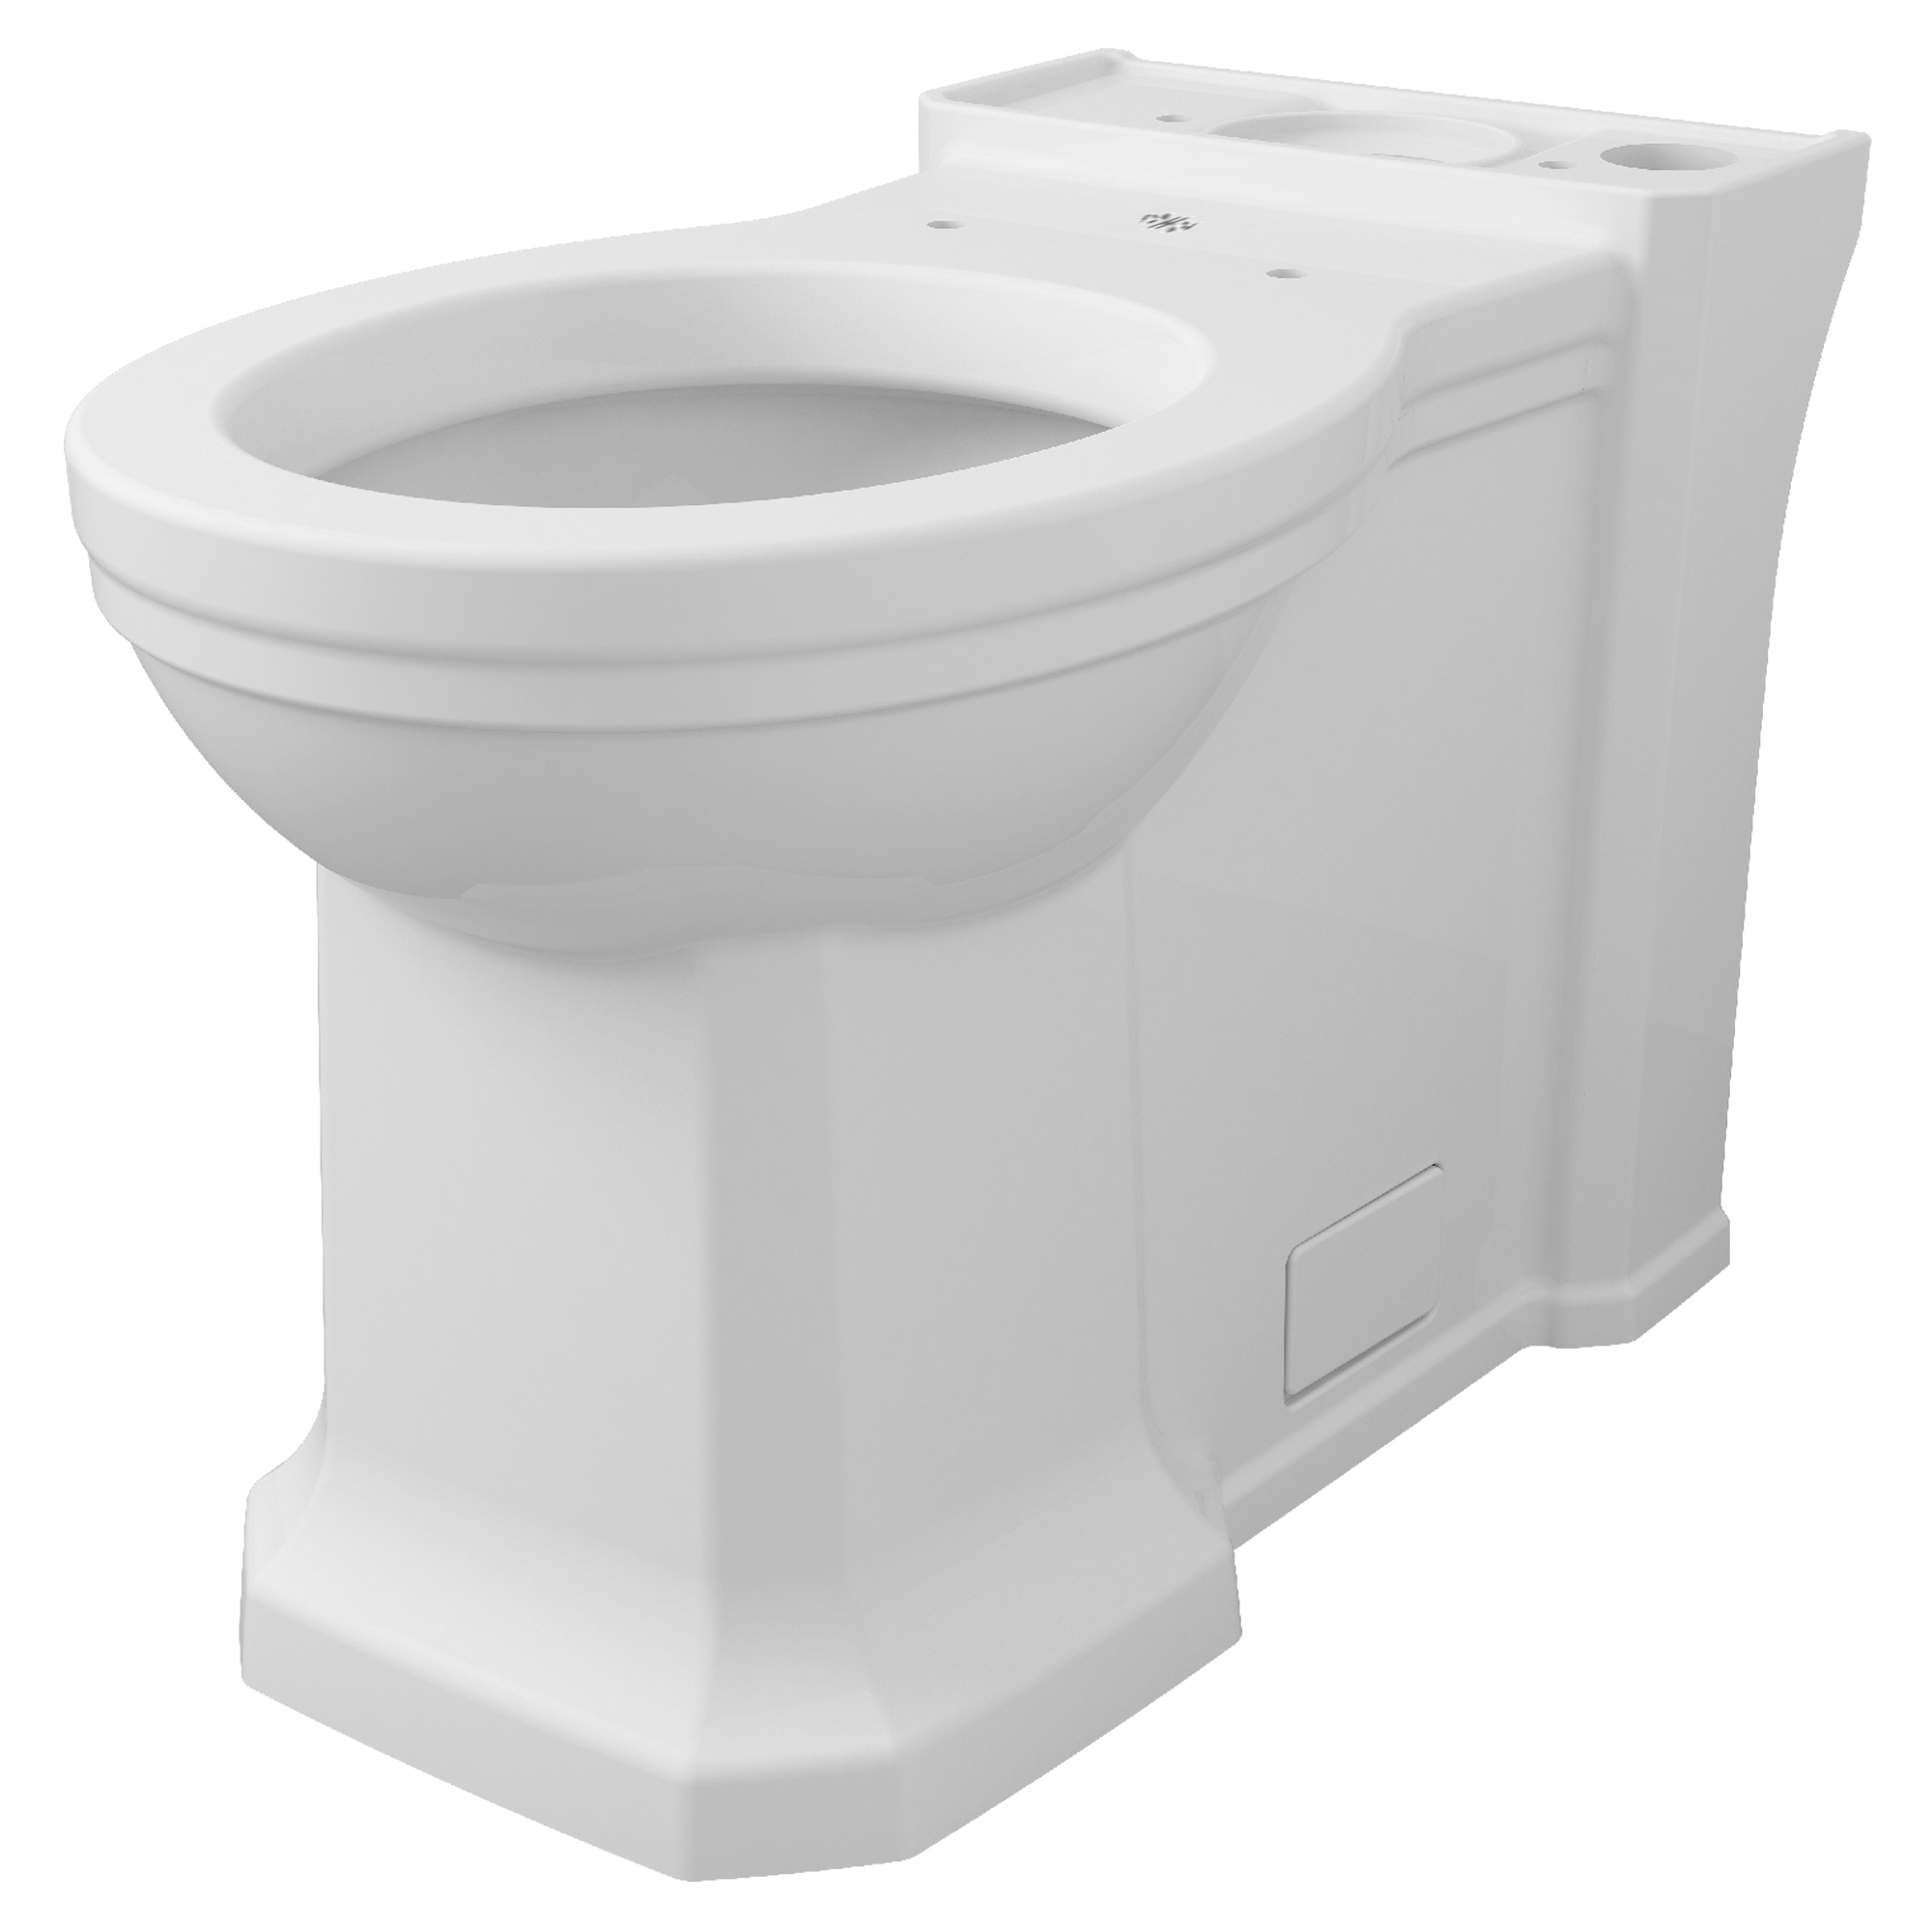 Fitzgerald Chair Height Round Front Toilet Bowl with Seat